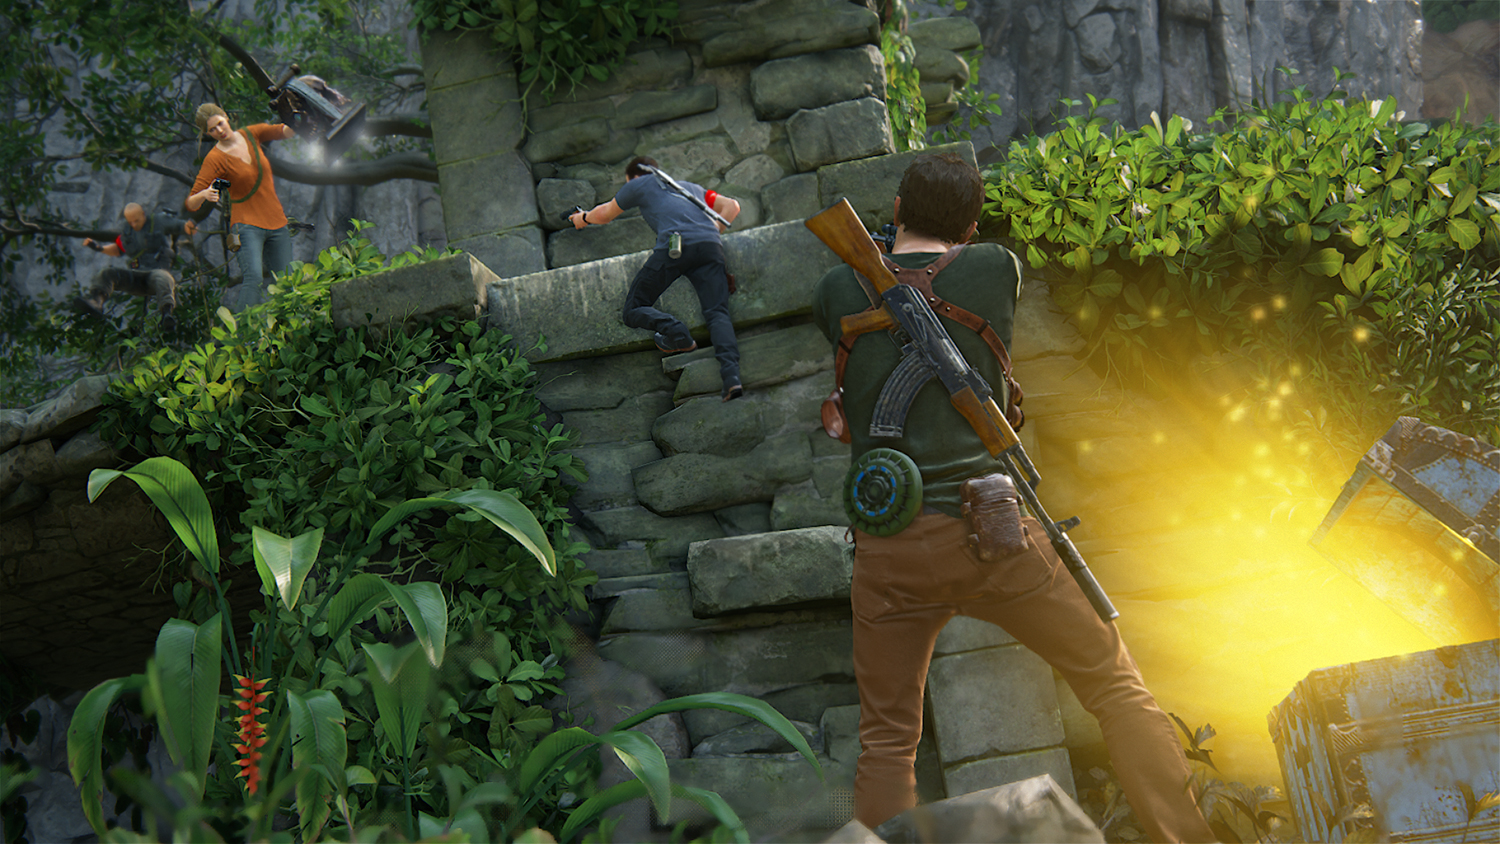 Download Uncharted 4 A Thief's End Game Free For PC Full Version